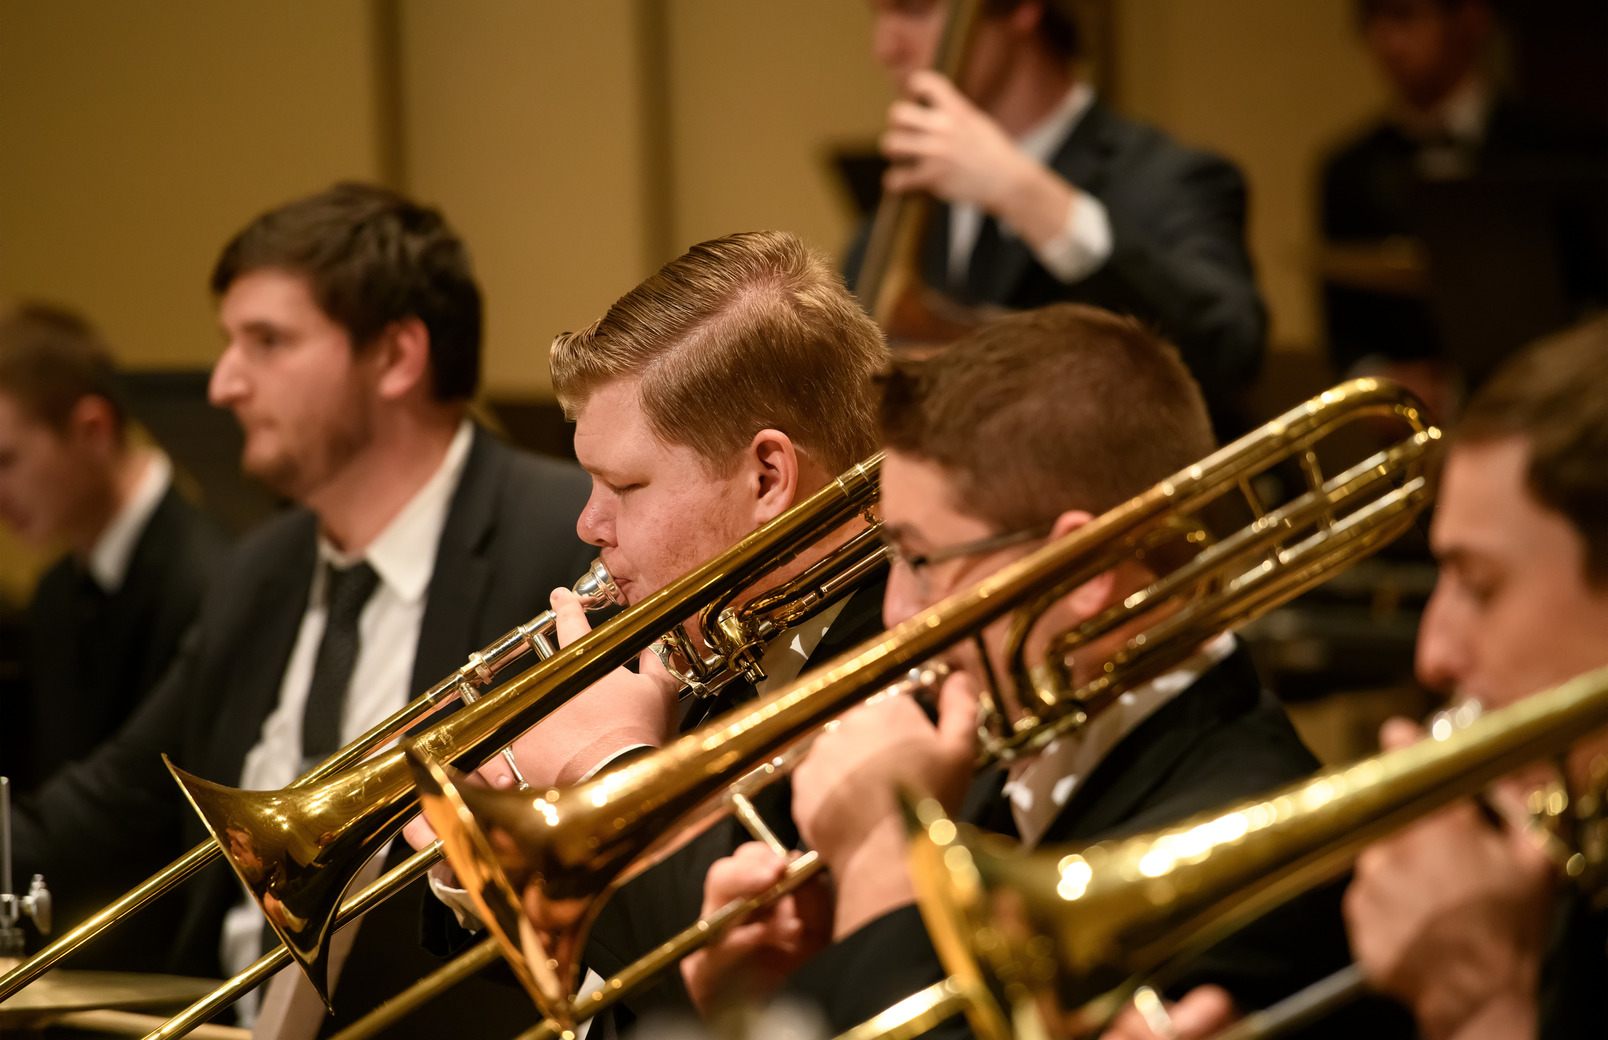 Trombone section playing during a concert